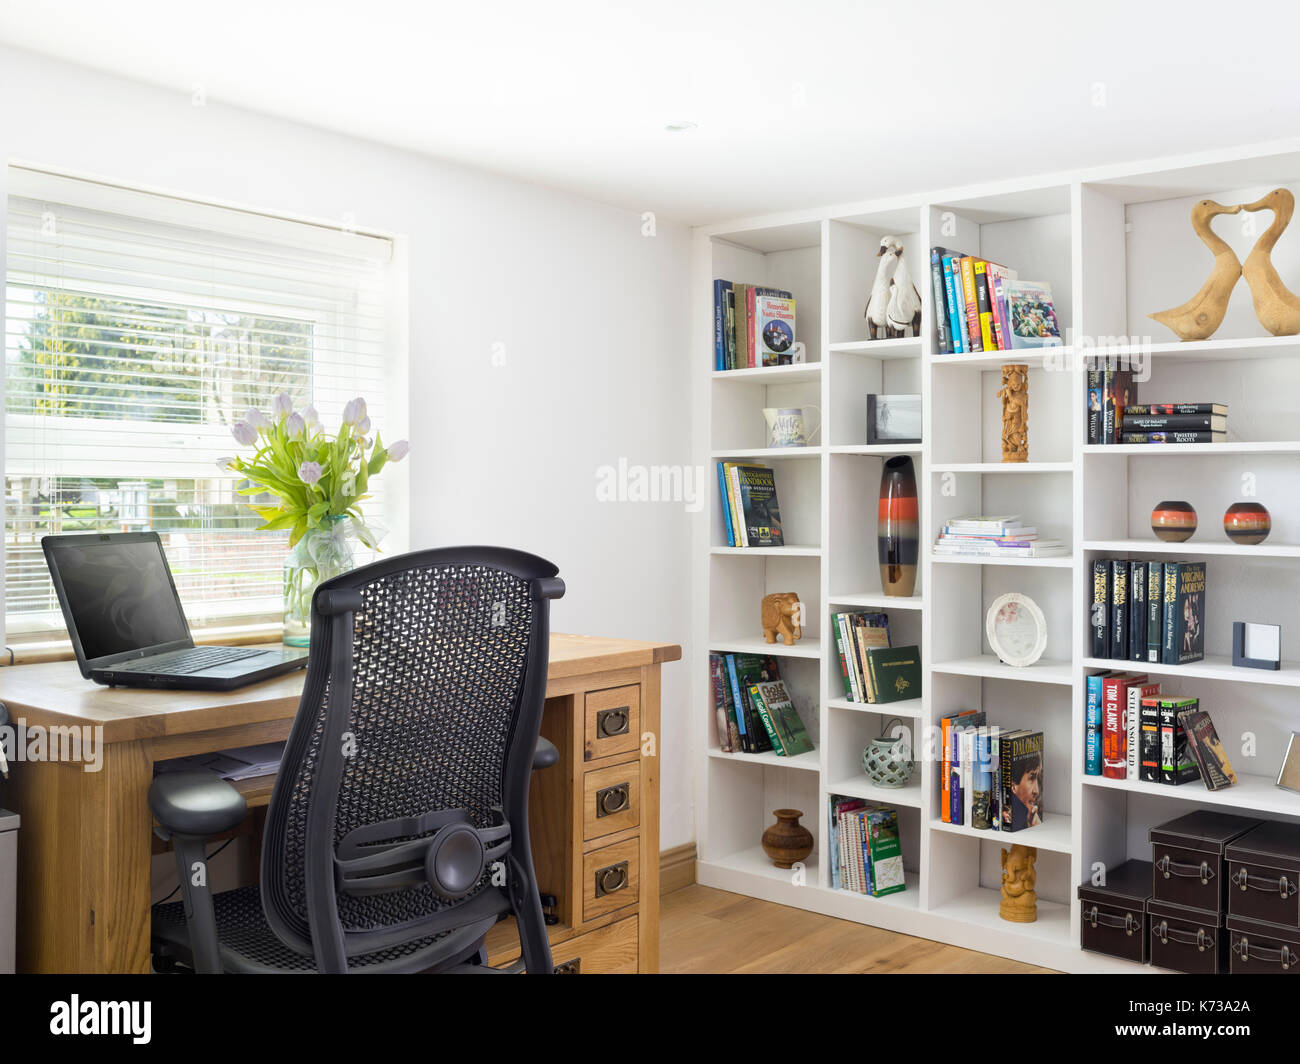 A pleasant home office in a contemporary home with oak desk, laptop and shelving Stock Photo